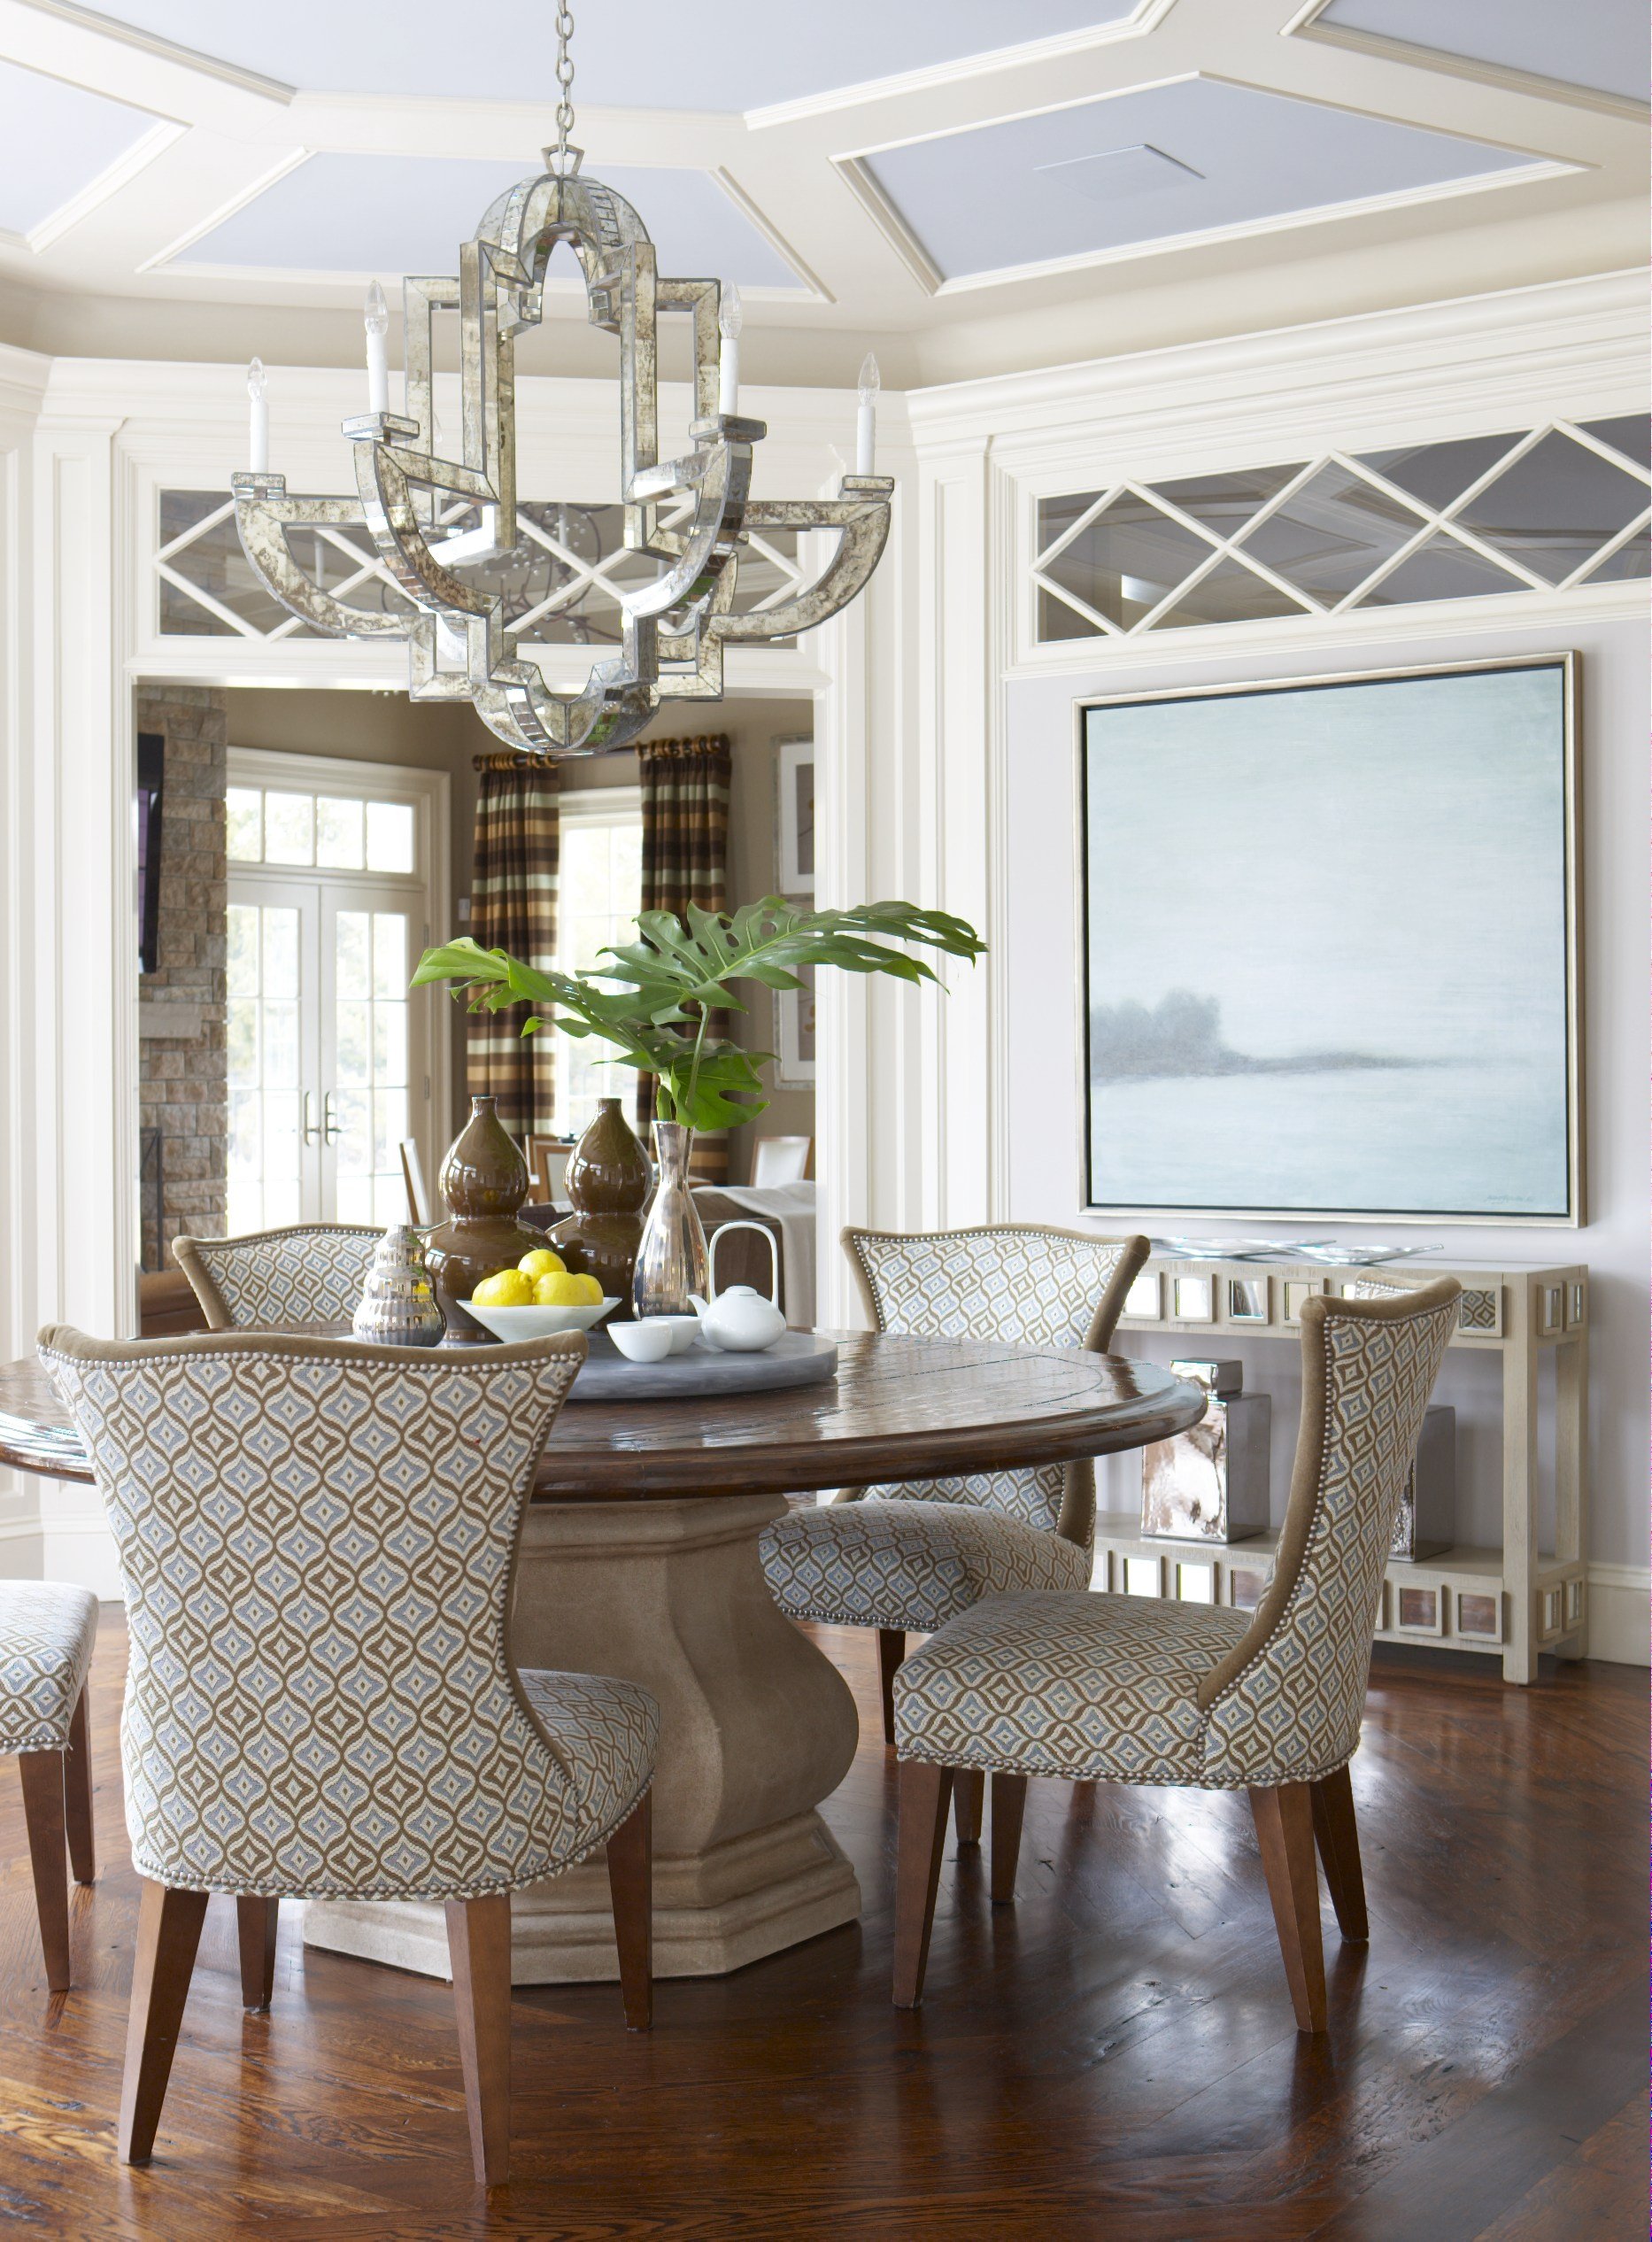 8-dining-area-patterns-warm-bright-open-transitional-colonial-greenwich-connecticut.jpg